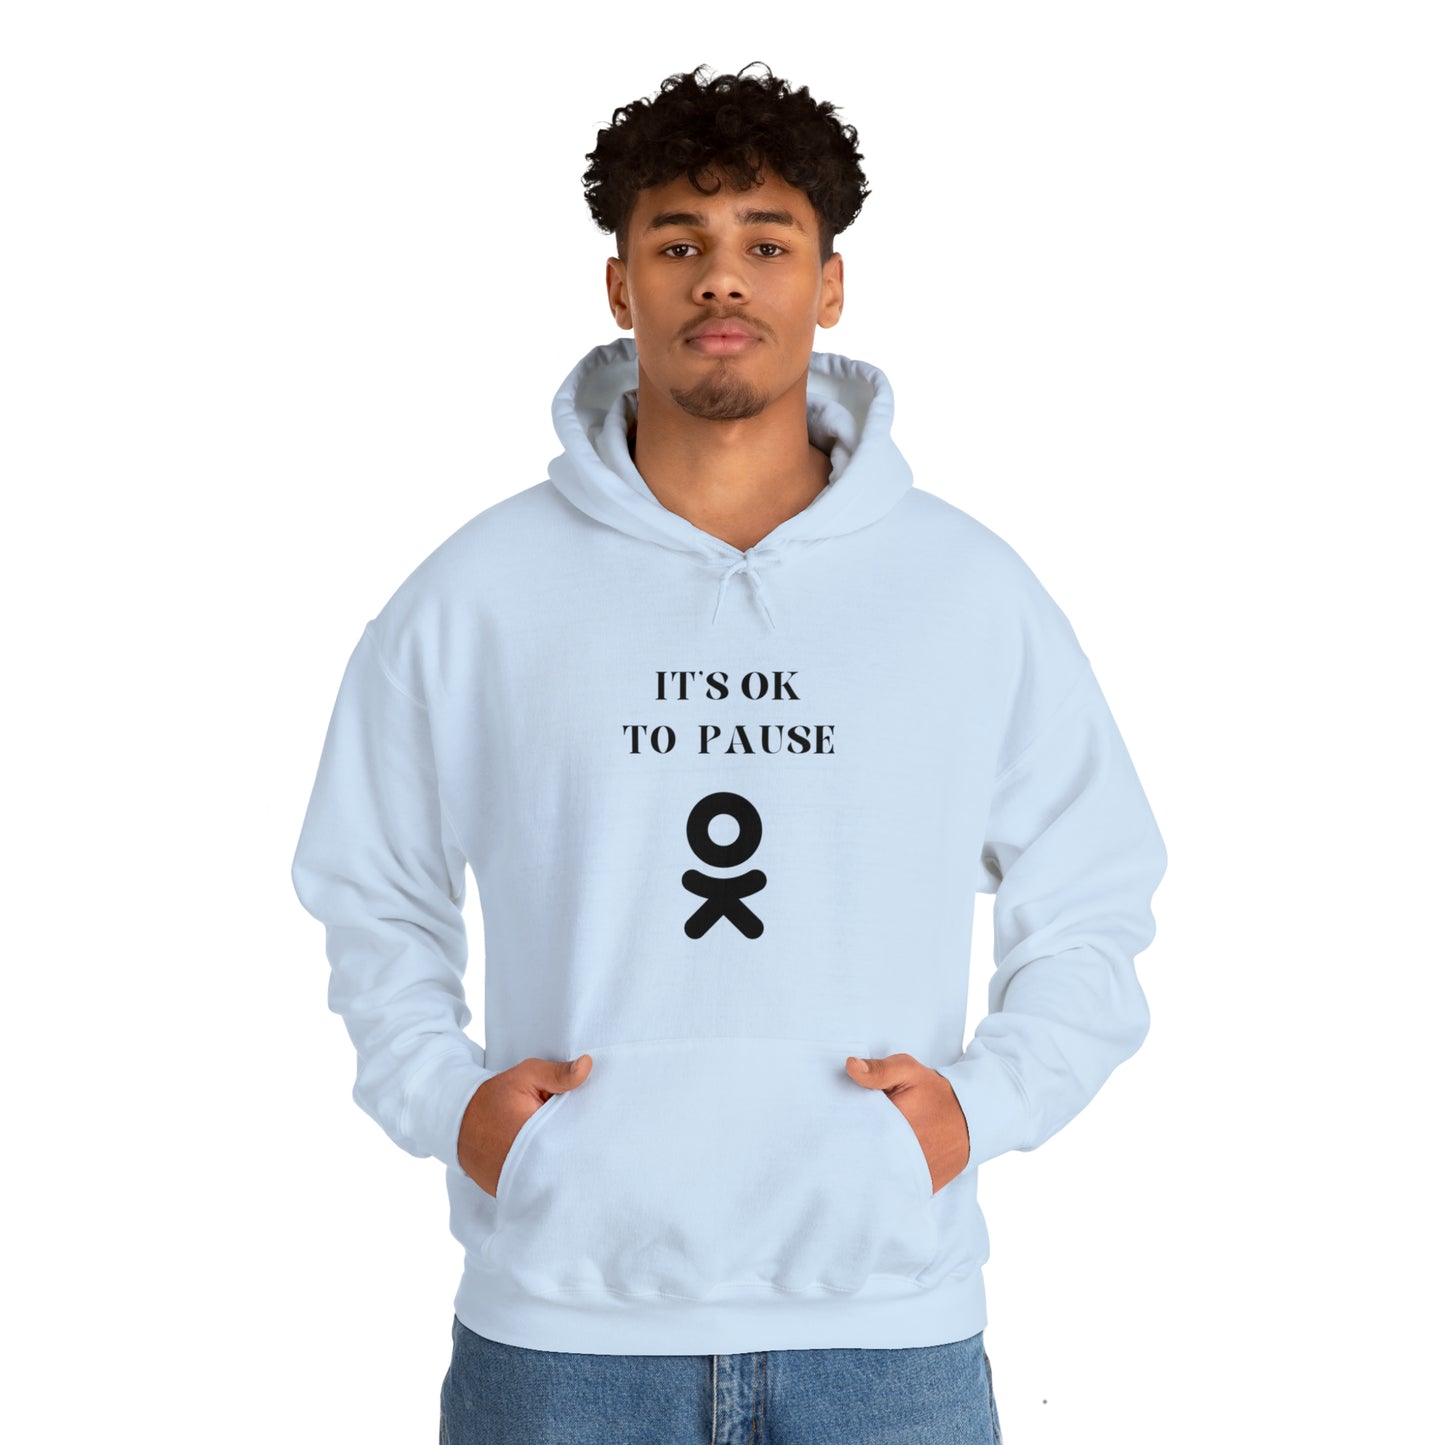 It's ok to pause hooded sweatshirt gift  inspirational words  hoodie gift to encourage. sweatshirt gifts for friends